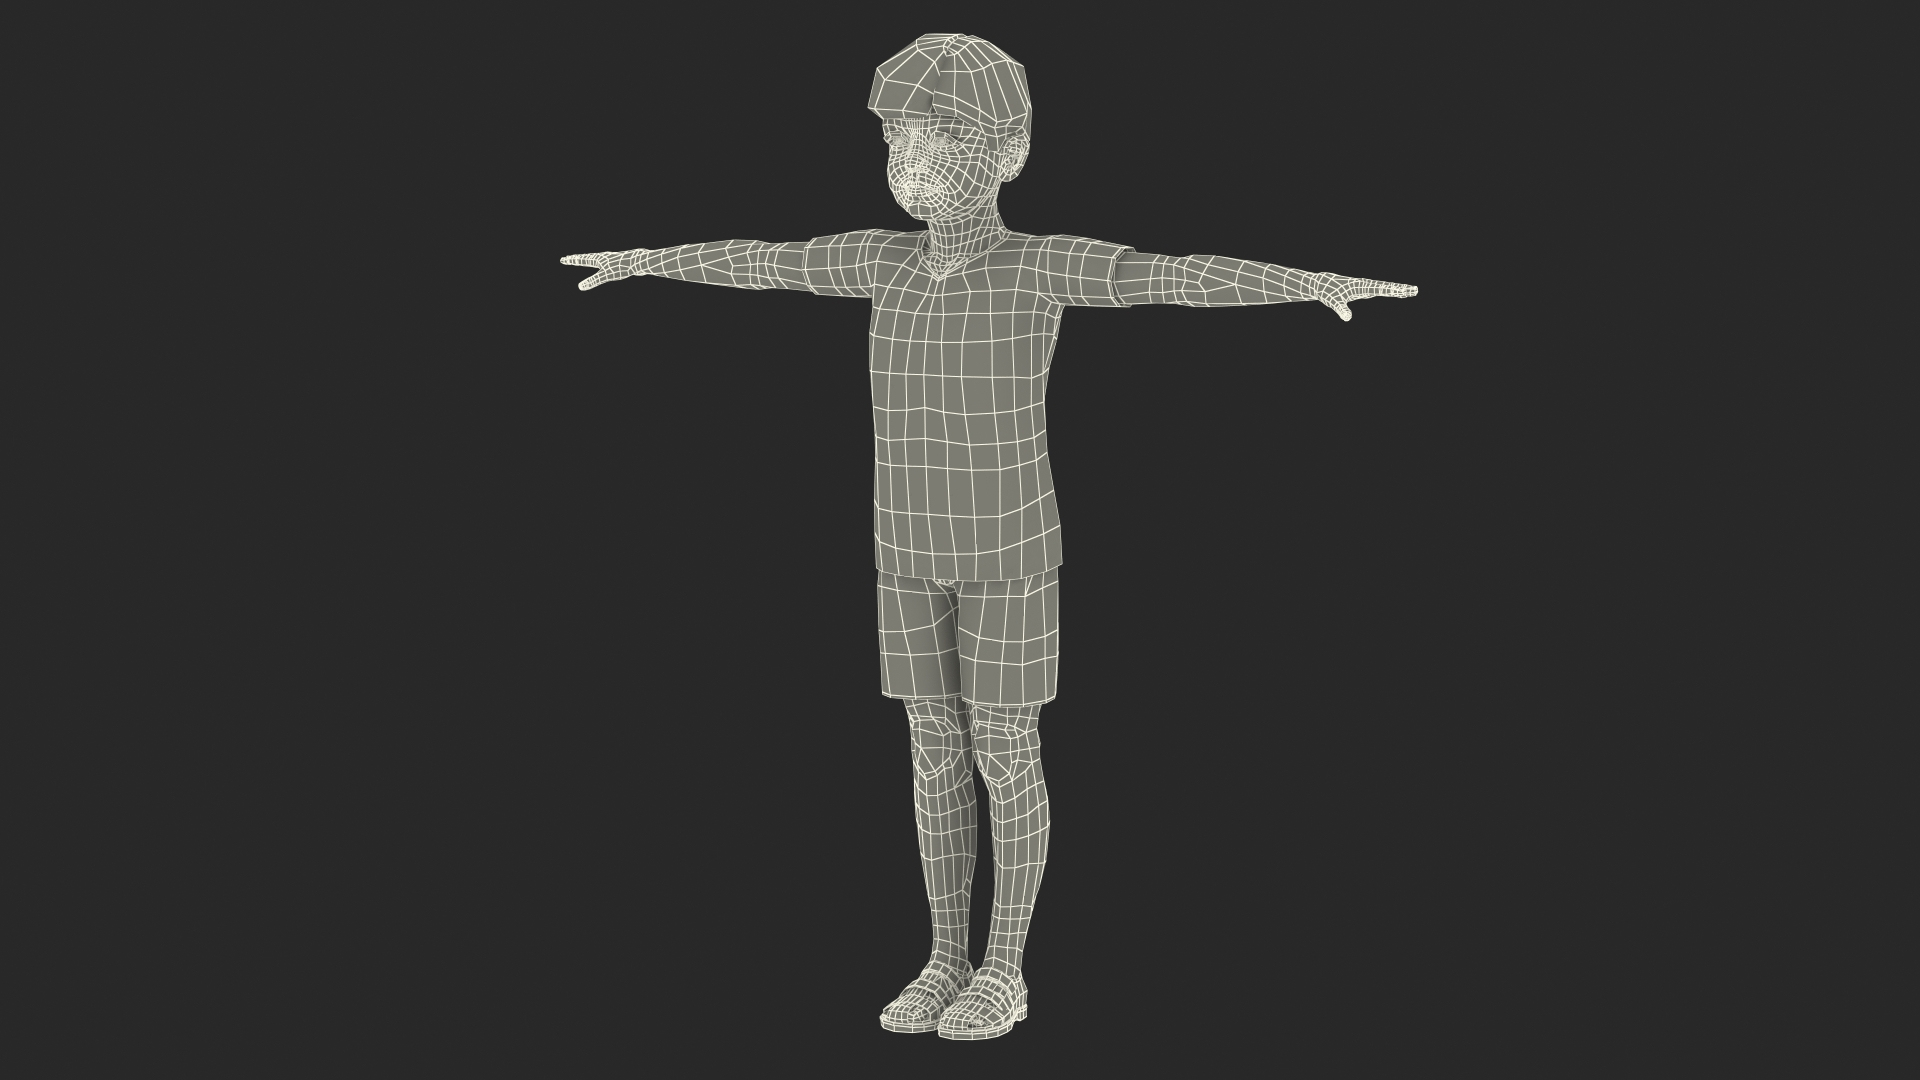 T pose character modeling plan by Puffinweeb on DeviantArt, t pose character